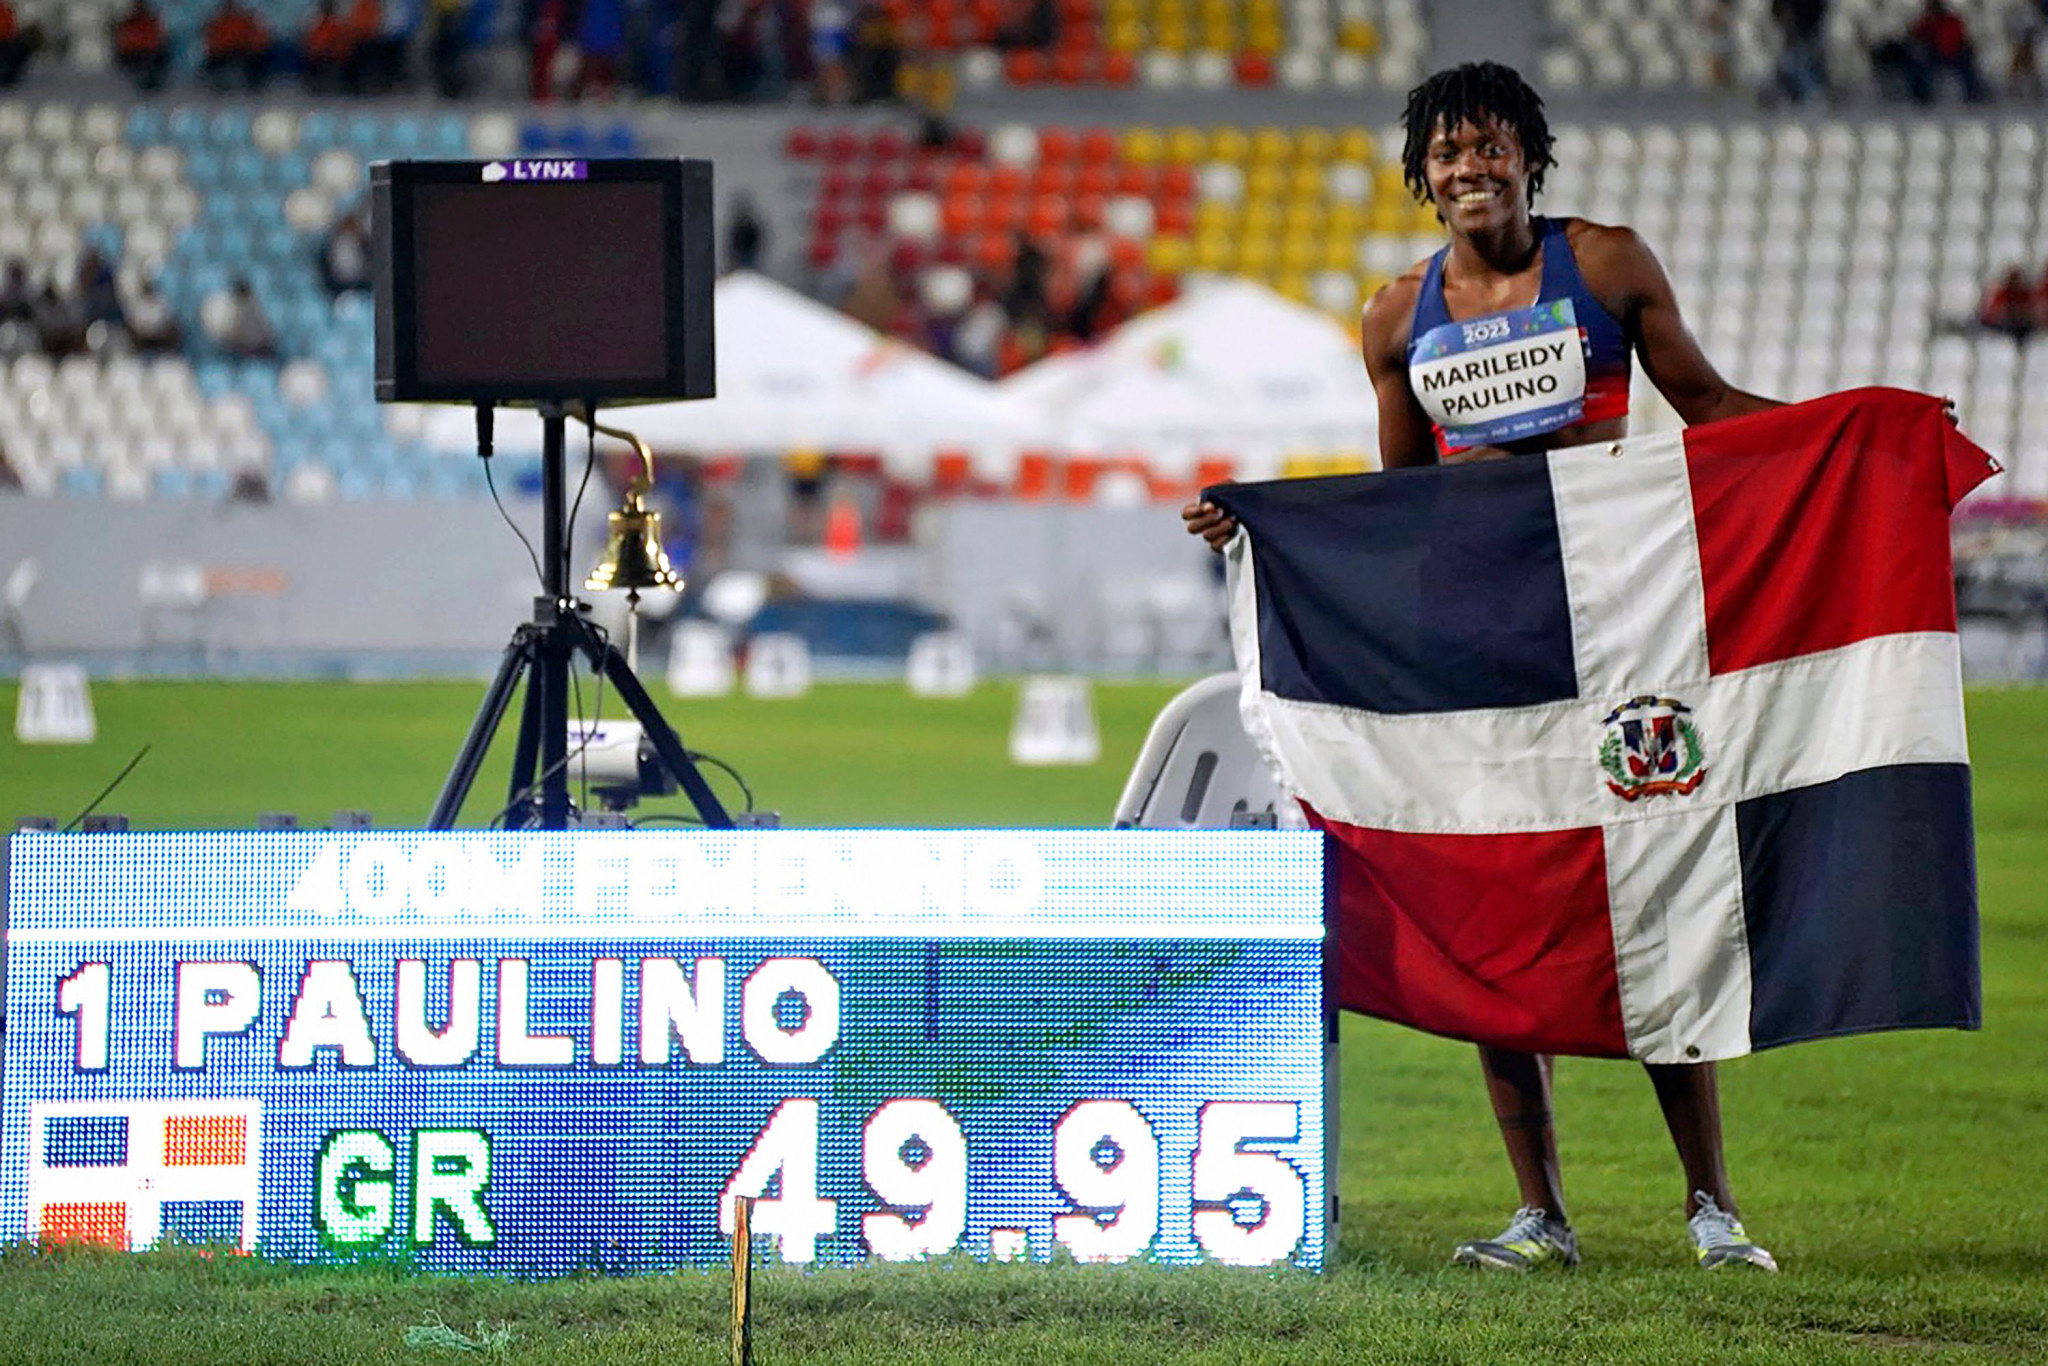 Three 400m runners qualify for Paris 2024 at Central American and Caribbean Games